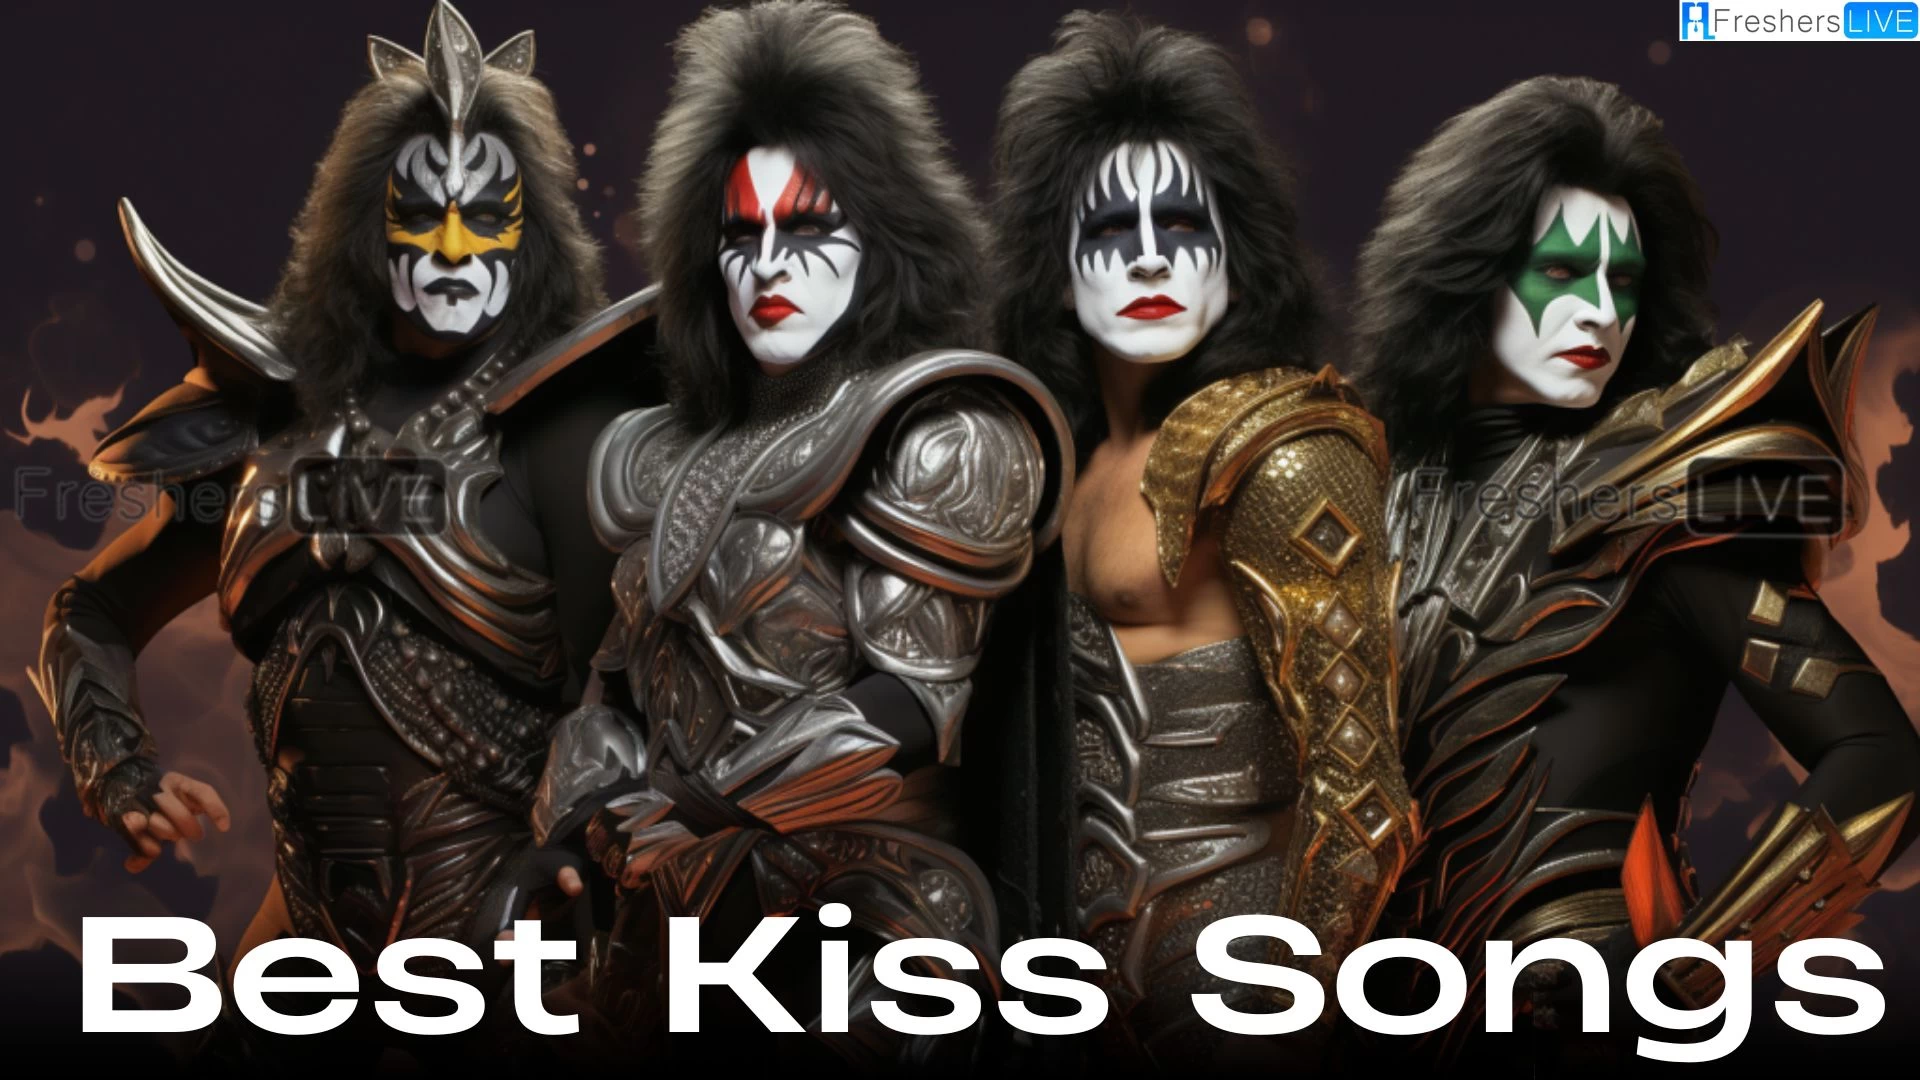 Best Kiss Songs - Top 10 Unforgettable Anthems